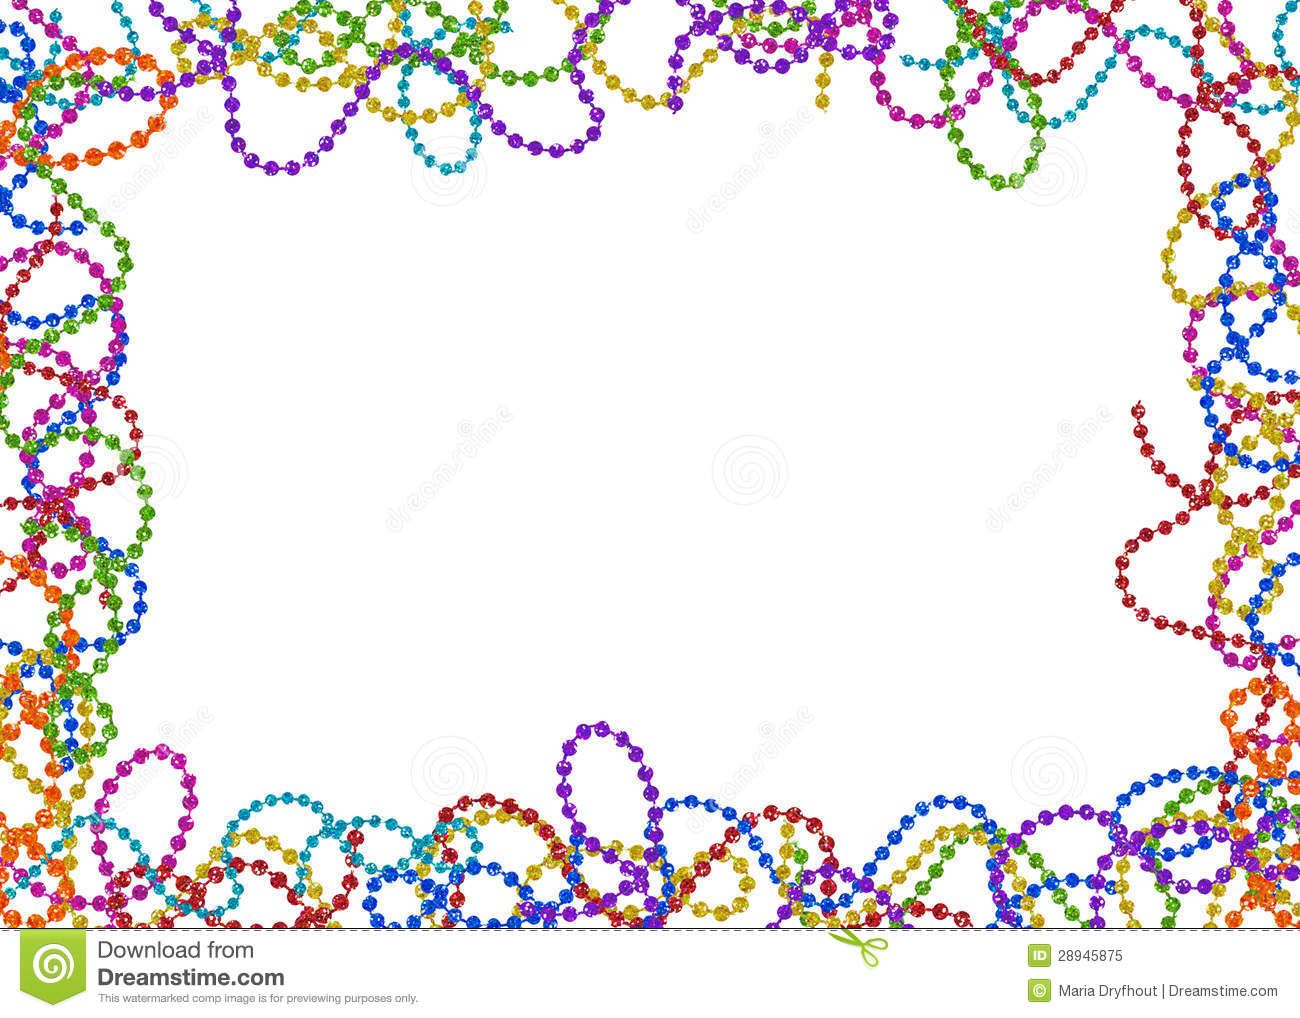 mardi-gras-beads-border-clip-art-10-free-cliparts-download-images-on